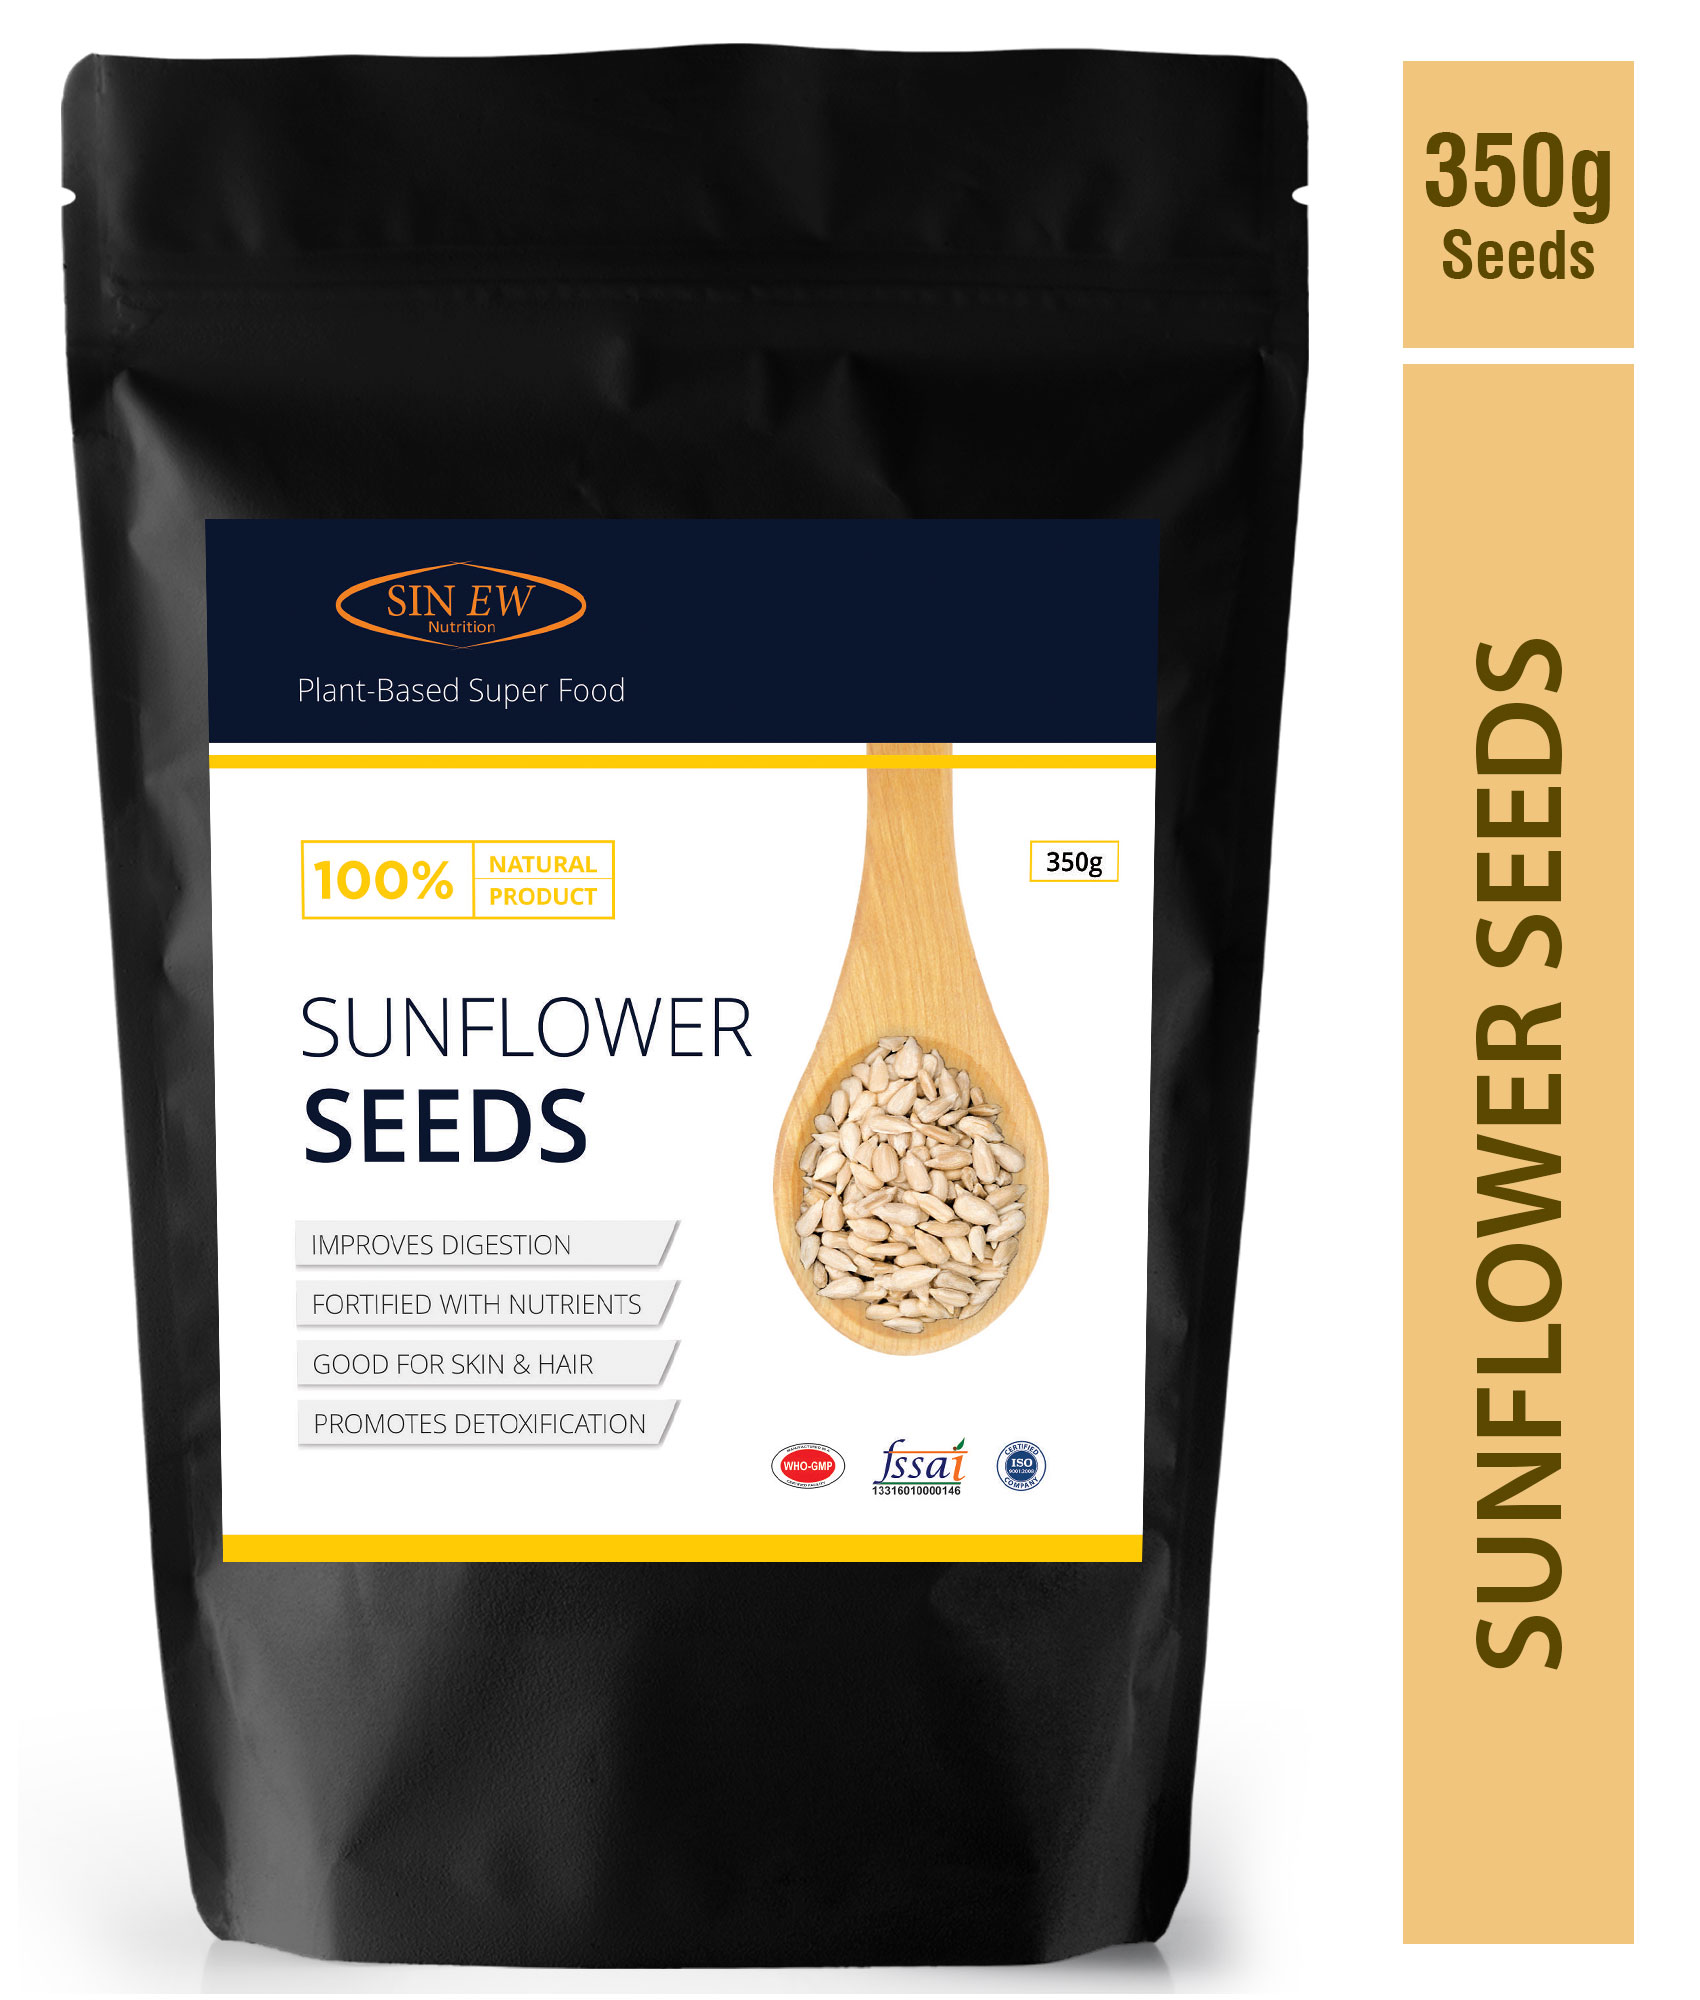 Buy Sinew Sunflower Seeds 350gm Online in India 